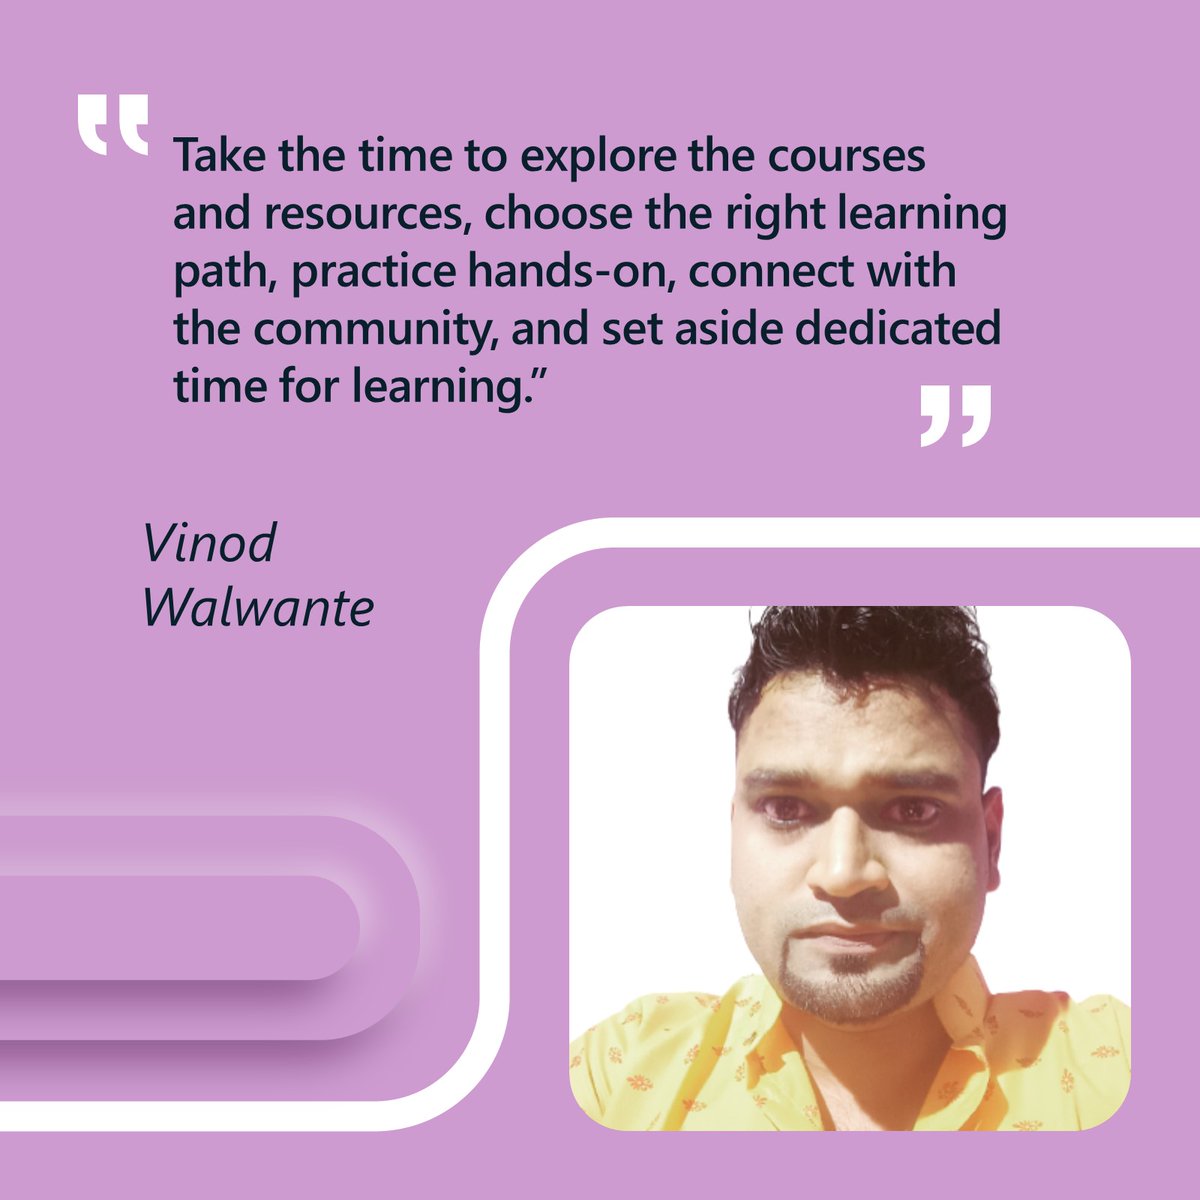 We couldn't have said it better ourselves, Vinod. 🤓 

Stay tuned for more advice from our community and in the meantime, explore the Microsoft Learn Community: msft.it/6010gesXA